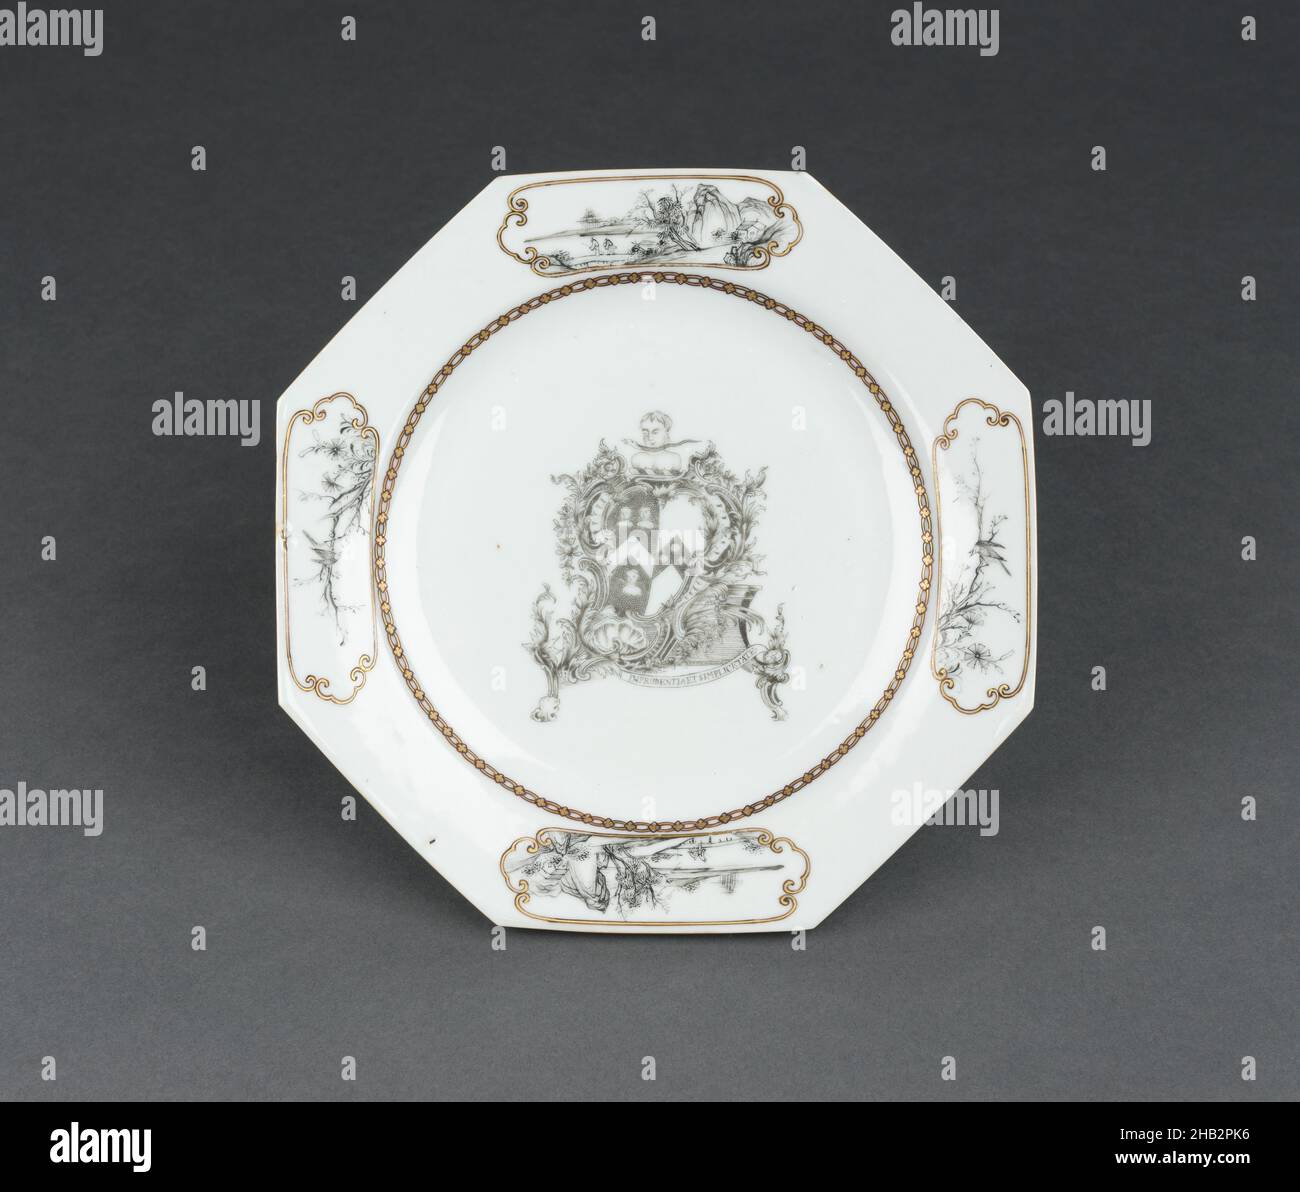 Plate with Arms of Samuel and Sarah Vaughan, Chinese, c.1755, Glazed porcelain with enamel and gilding, Made in China, Asia, Ceramics, diameter: 9 in. (22.9 cm Stock Photo